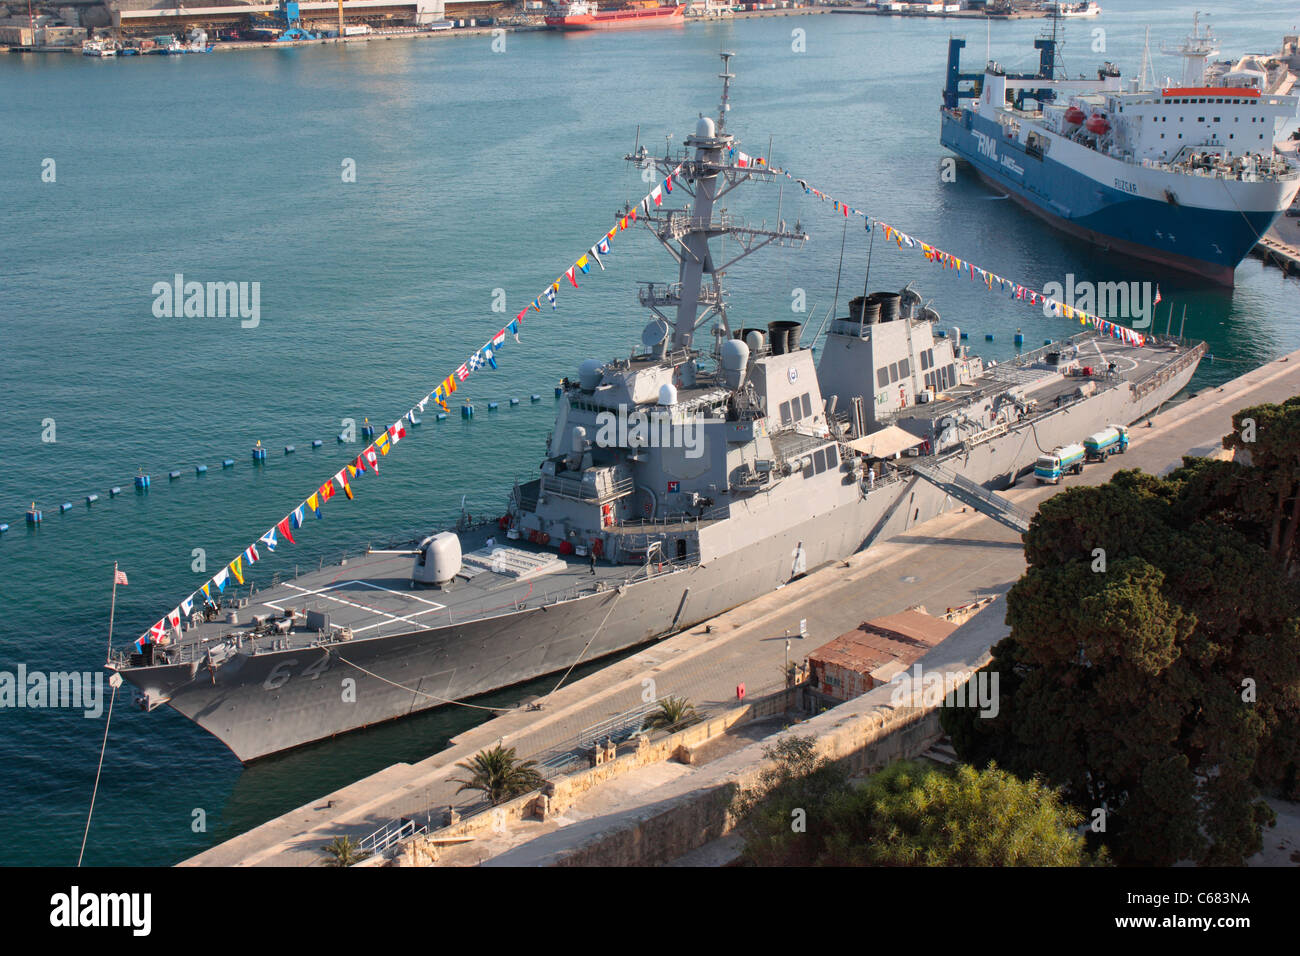 The US Navy destroyer USS Carney in Malta's Grand Harbour Stock Photo